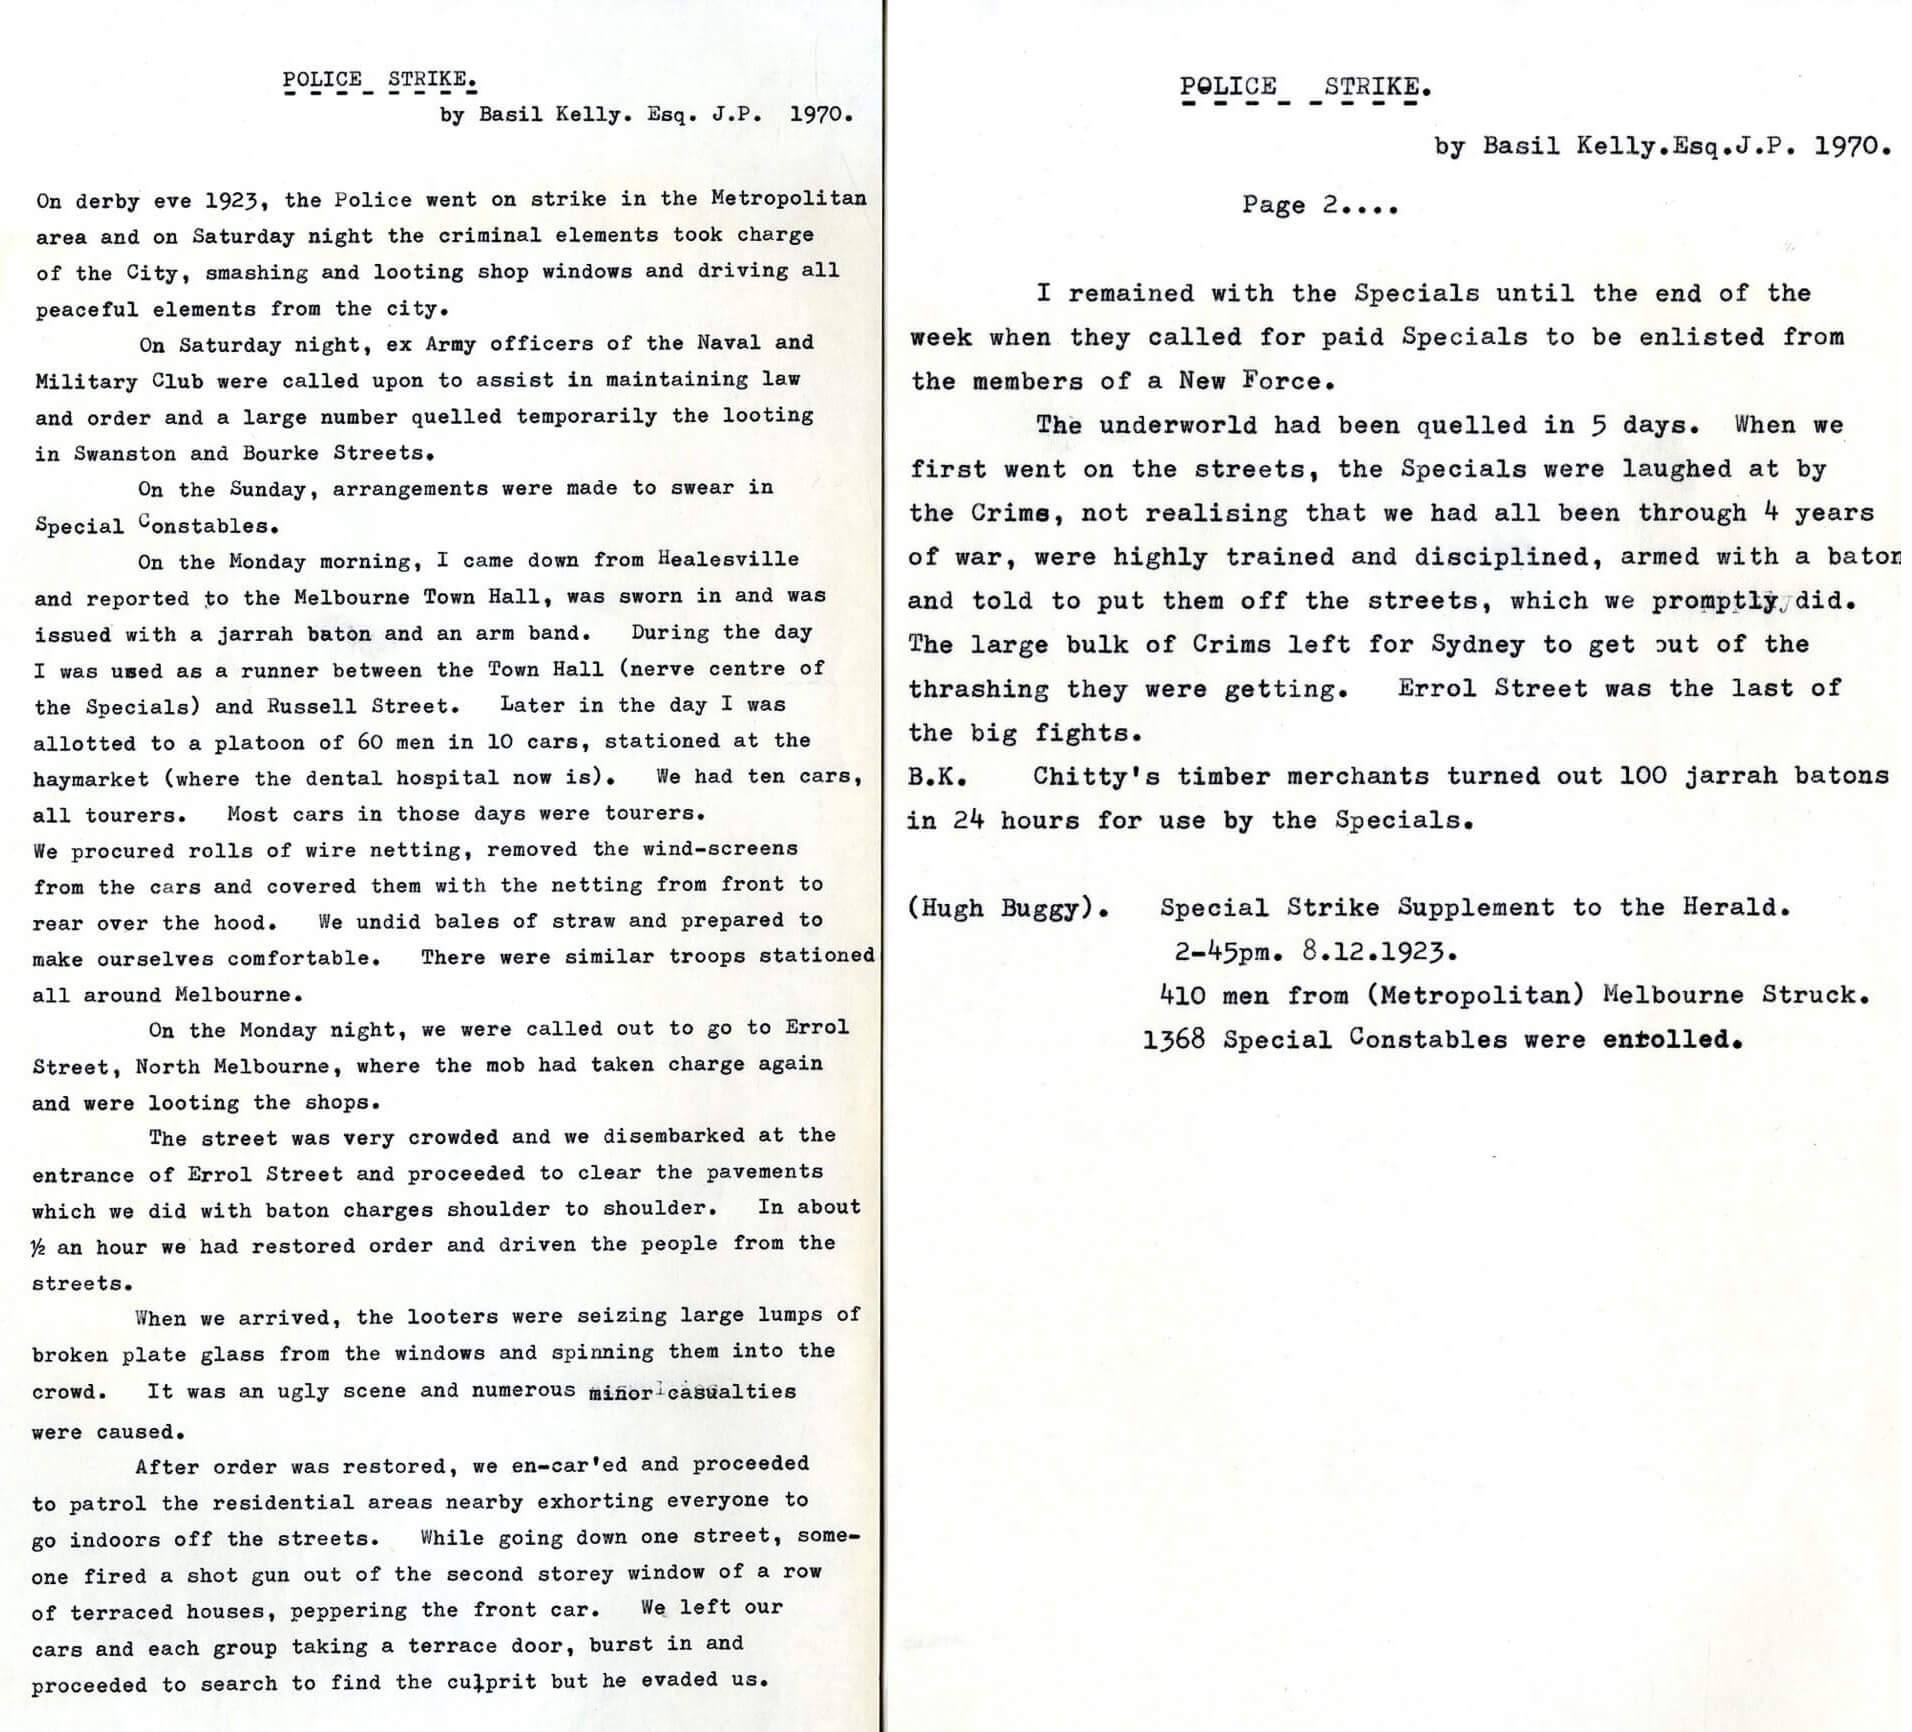 Typed document titled "Police Strike by Basil Kelly. Esq. J.P. 1970." reads: On derby eve 1923, the Police went on strike in the Metropolitan area and on Saturday night the criminal elements took charge of the City, smashing and looting shop windows and driving all peaceful elements from the city. On Saturday night, ex Army officers of the Naval and Military Club were called upon to assist in maintaining law and order and a large number quelled temporarily the looting in Swanston and Bourke Streets. One the Sunday, arrangements were made to swear in Special Constables. On the Monday morning, I came down from Healesville and reported to the Melbourne Town Hall, was sworn in and was issued with a jarrah baton and an arm band. During the day I was used as a runner between the Town Hall (nerve centre of the Specials) and Russell Street. Later in the day I was allotted to a platoon or 60 men in 10 cars, stationed at the haymarket (where the dental hospital now is). We had 10 cards, all tourers. Most cars in those days were tourers. We procured rolls of wire netting, removed the wind-screens from the cars and covered them with the netting from front to rear over the hood. We undid bales of straw and prepared to make ourselves comfortable. There were similar troops stationed all around Melbourne. On the Monday night, we were called out to go to Errol Street, North Melbourne, where the mob had taken charge again and were looting the shops. The street was very crowded and we disembarked at the entrance of Errol Street and proceeded to clear the pavements which we did with baton charges shoulder to shoulder. In about ½ an hour we had restored order and driven the people from the streets. When we arrived the looters were seizing large lumps of broken plate glass from the windows and spinning them into the crowd. It was an ugly scene and numerous minor casualties were caused. After order was restored, we en-car’ed and proceeded to patrol the residential areas nearby exhorting everyone to go indoors off the streets. While going down one street someone fired a shot gun out of the second storey window of a row of terraced houses, peppering the front car. We left our cars and each group taking a terrace door, burst in and proceeded to search to find the culprit but he evaded us. I remained with the Specials until the end of the week when they called for paid Specials to be enlisted from the members of a New Force. The underworld had been quelled in 5 days. When we first went on the streets, the Specials were laughed at by the Crims, not realising that we had all been through 4 years of war, were highly trained and disciplined, armed with a baton and told to put them off the streets, which we promptly did. The large bulk of Crims left for Sydney to get out of the thrashing they were getting. Errol Street was the last of the big fights. B.K. Chitty’s timber merchants turned out 100 jarrah batons in 24 hours for use by the Specials. (Hugh Buggy). Special Strike Supplement to the Herald. 2-45pm. 8.12.1923. 410 men from (Metropolitan) Melbourne Struck. 1368 Special Constables were enrolled.